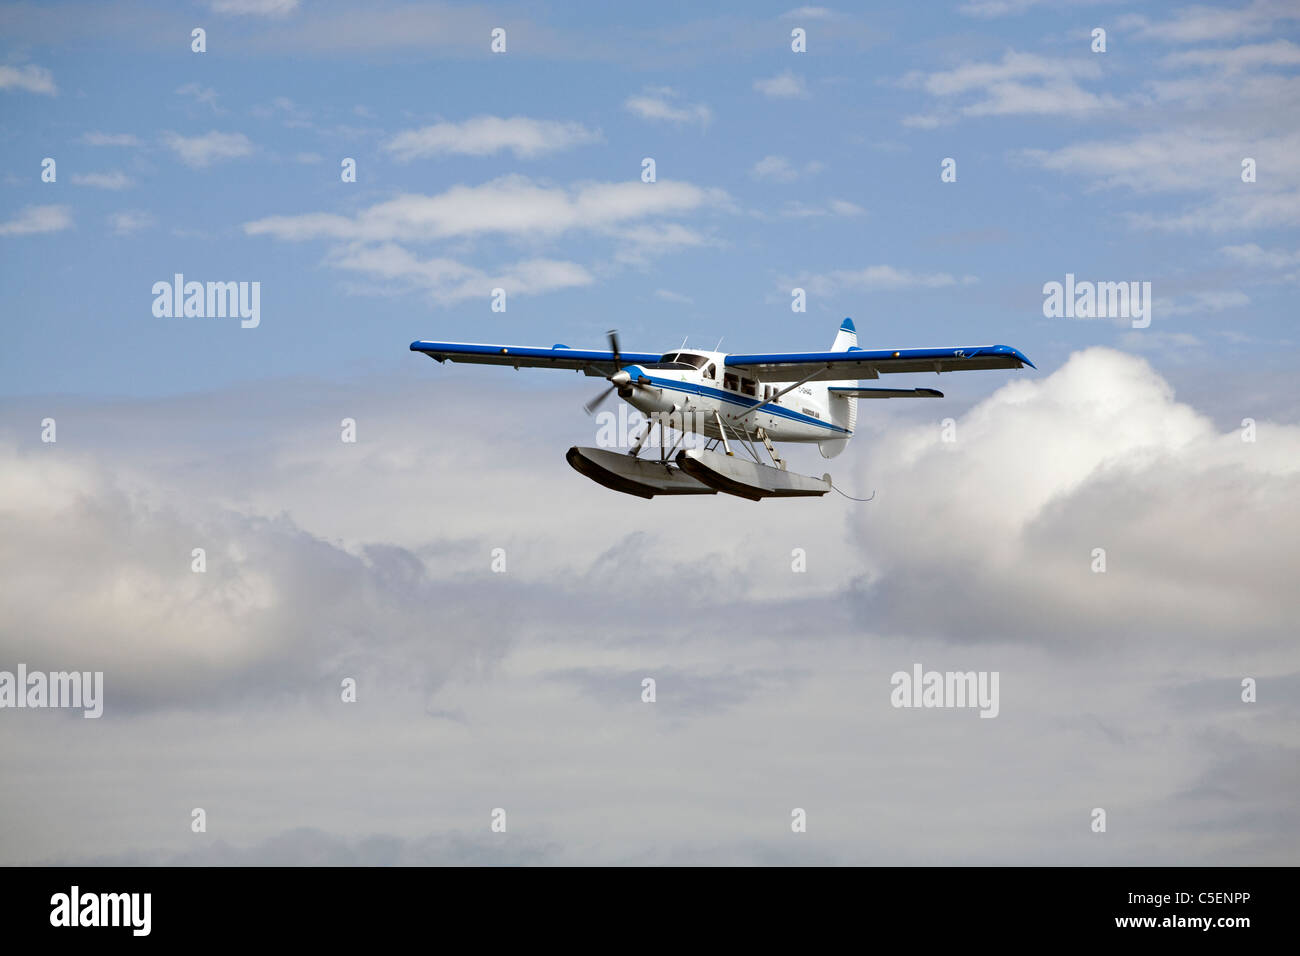 A de Havilland Canada DHC-3 Otter float plane or airplane flies over Puget Sound in the state of Washington Stock Photo